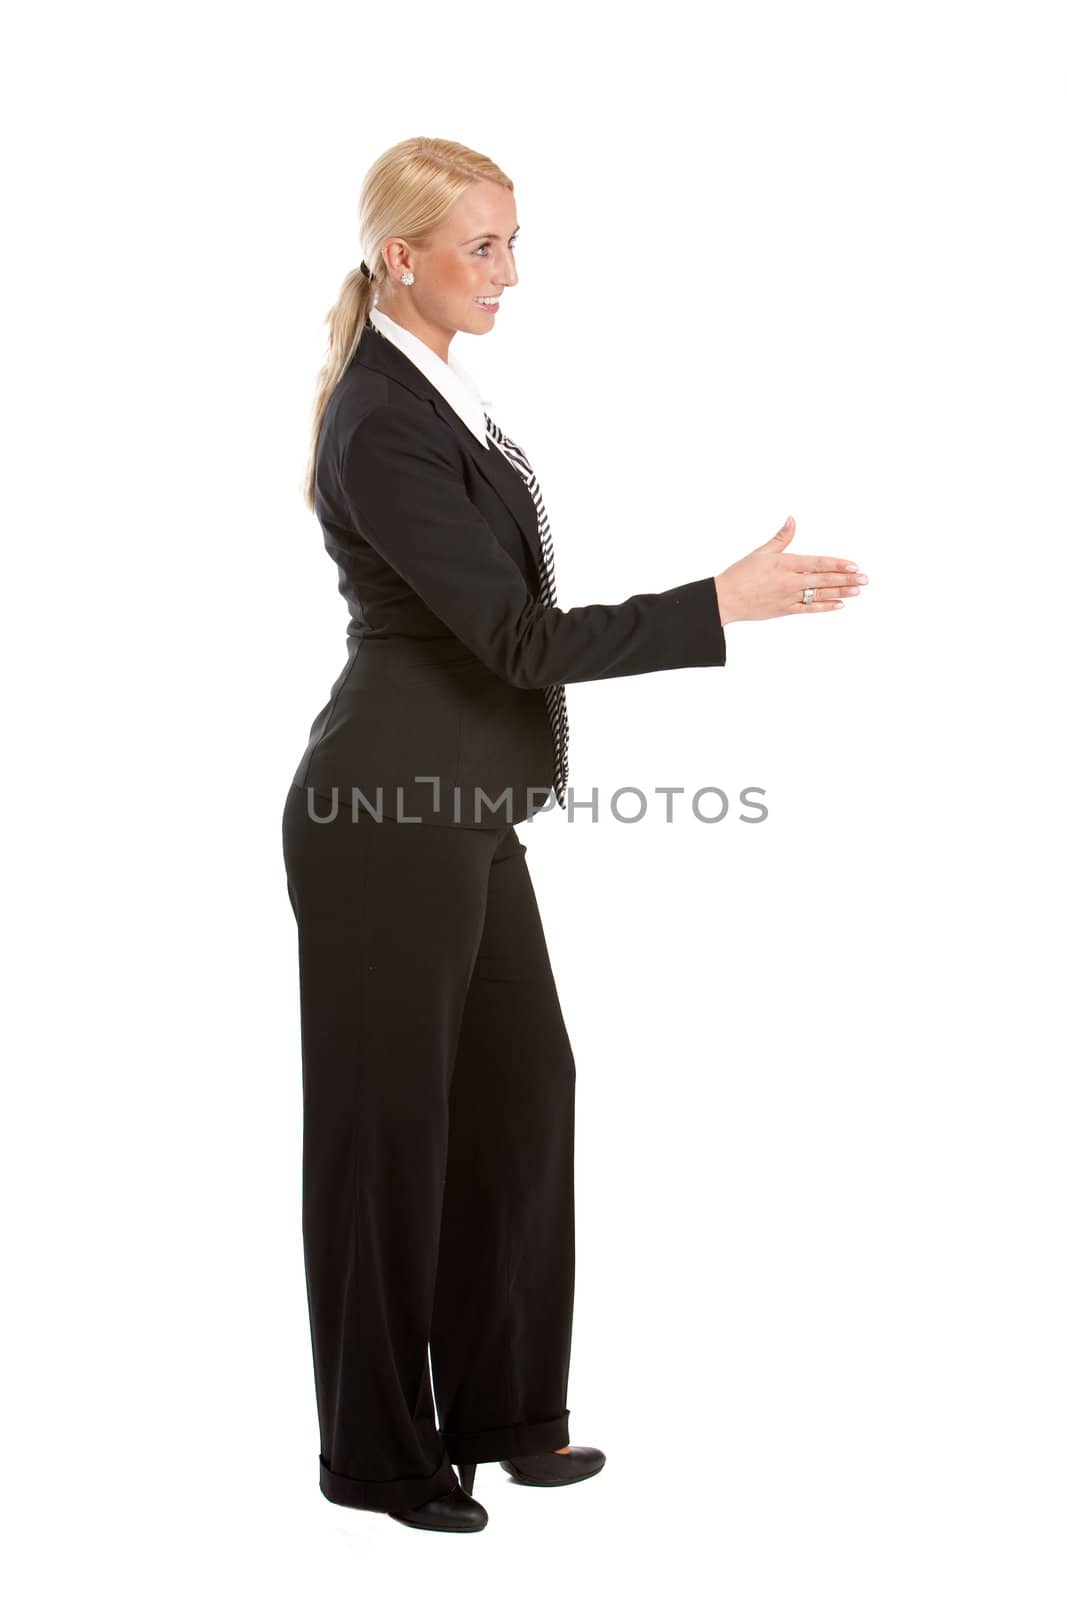 Pretty blond business woman extending her hand in welcome